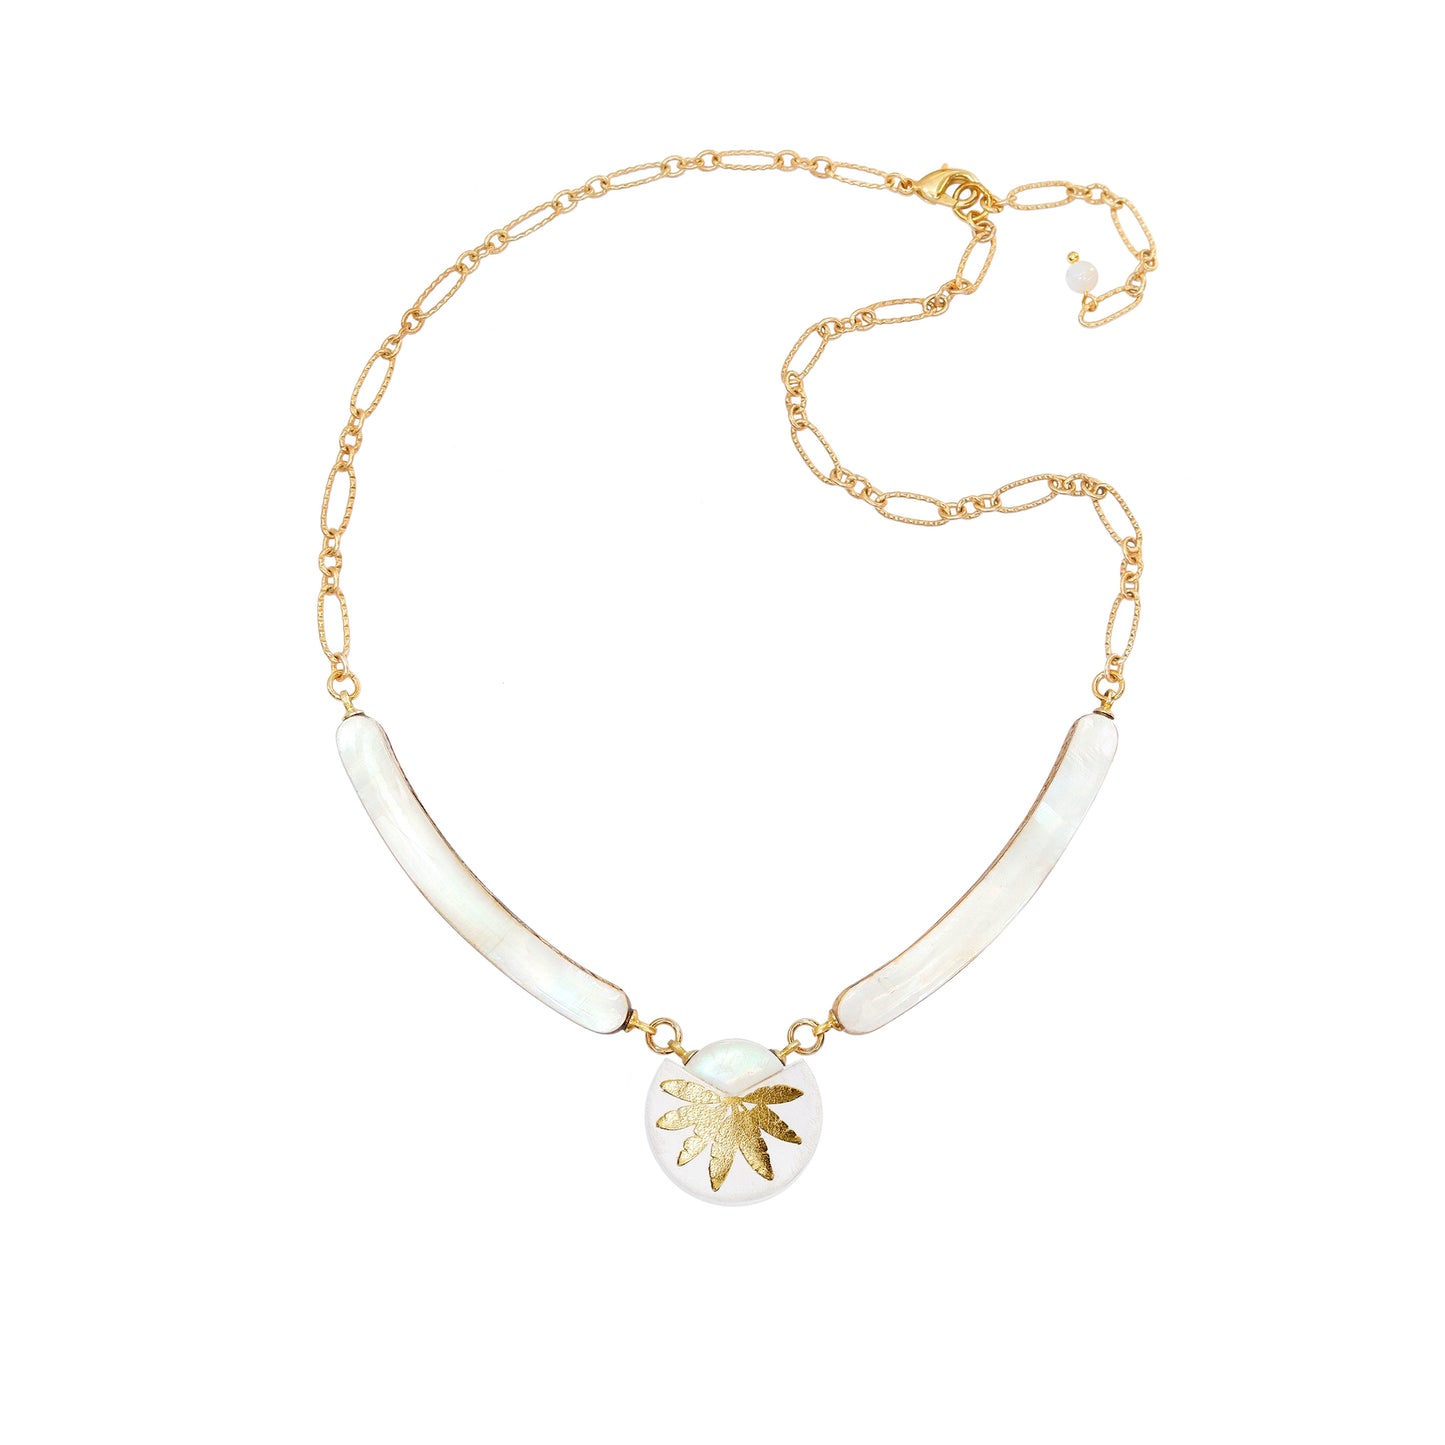 necklace with curved mother of pearl bars , white leather medallion with a gold palm print